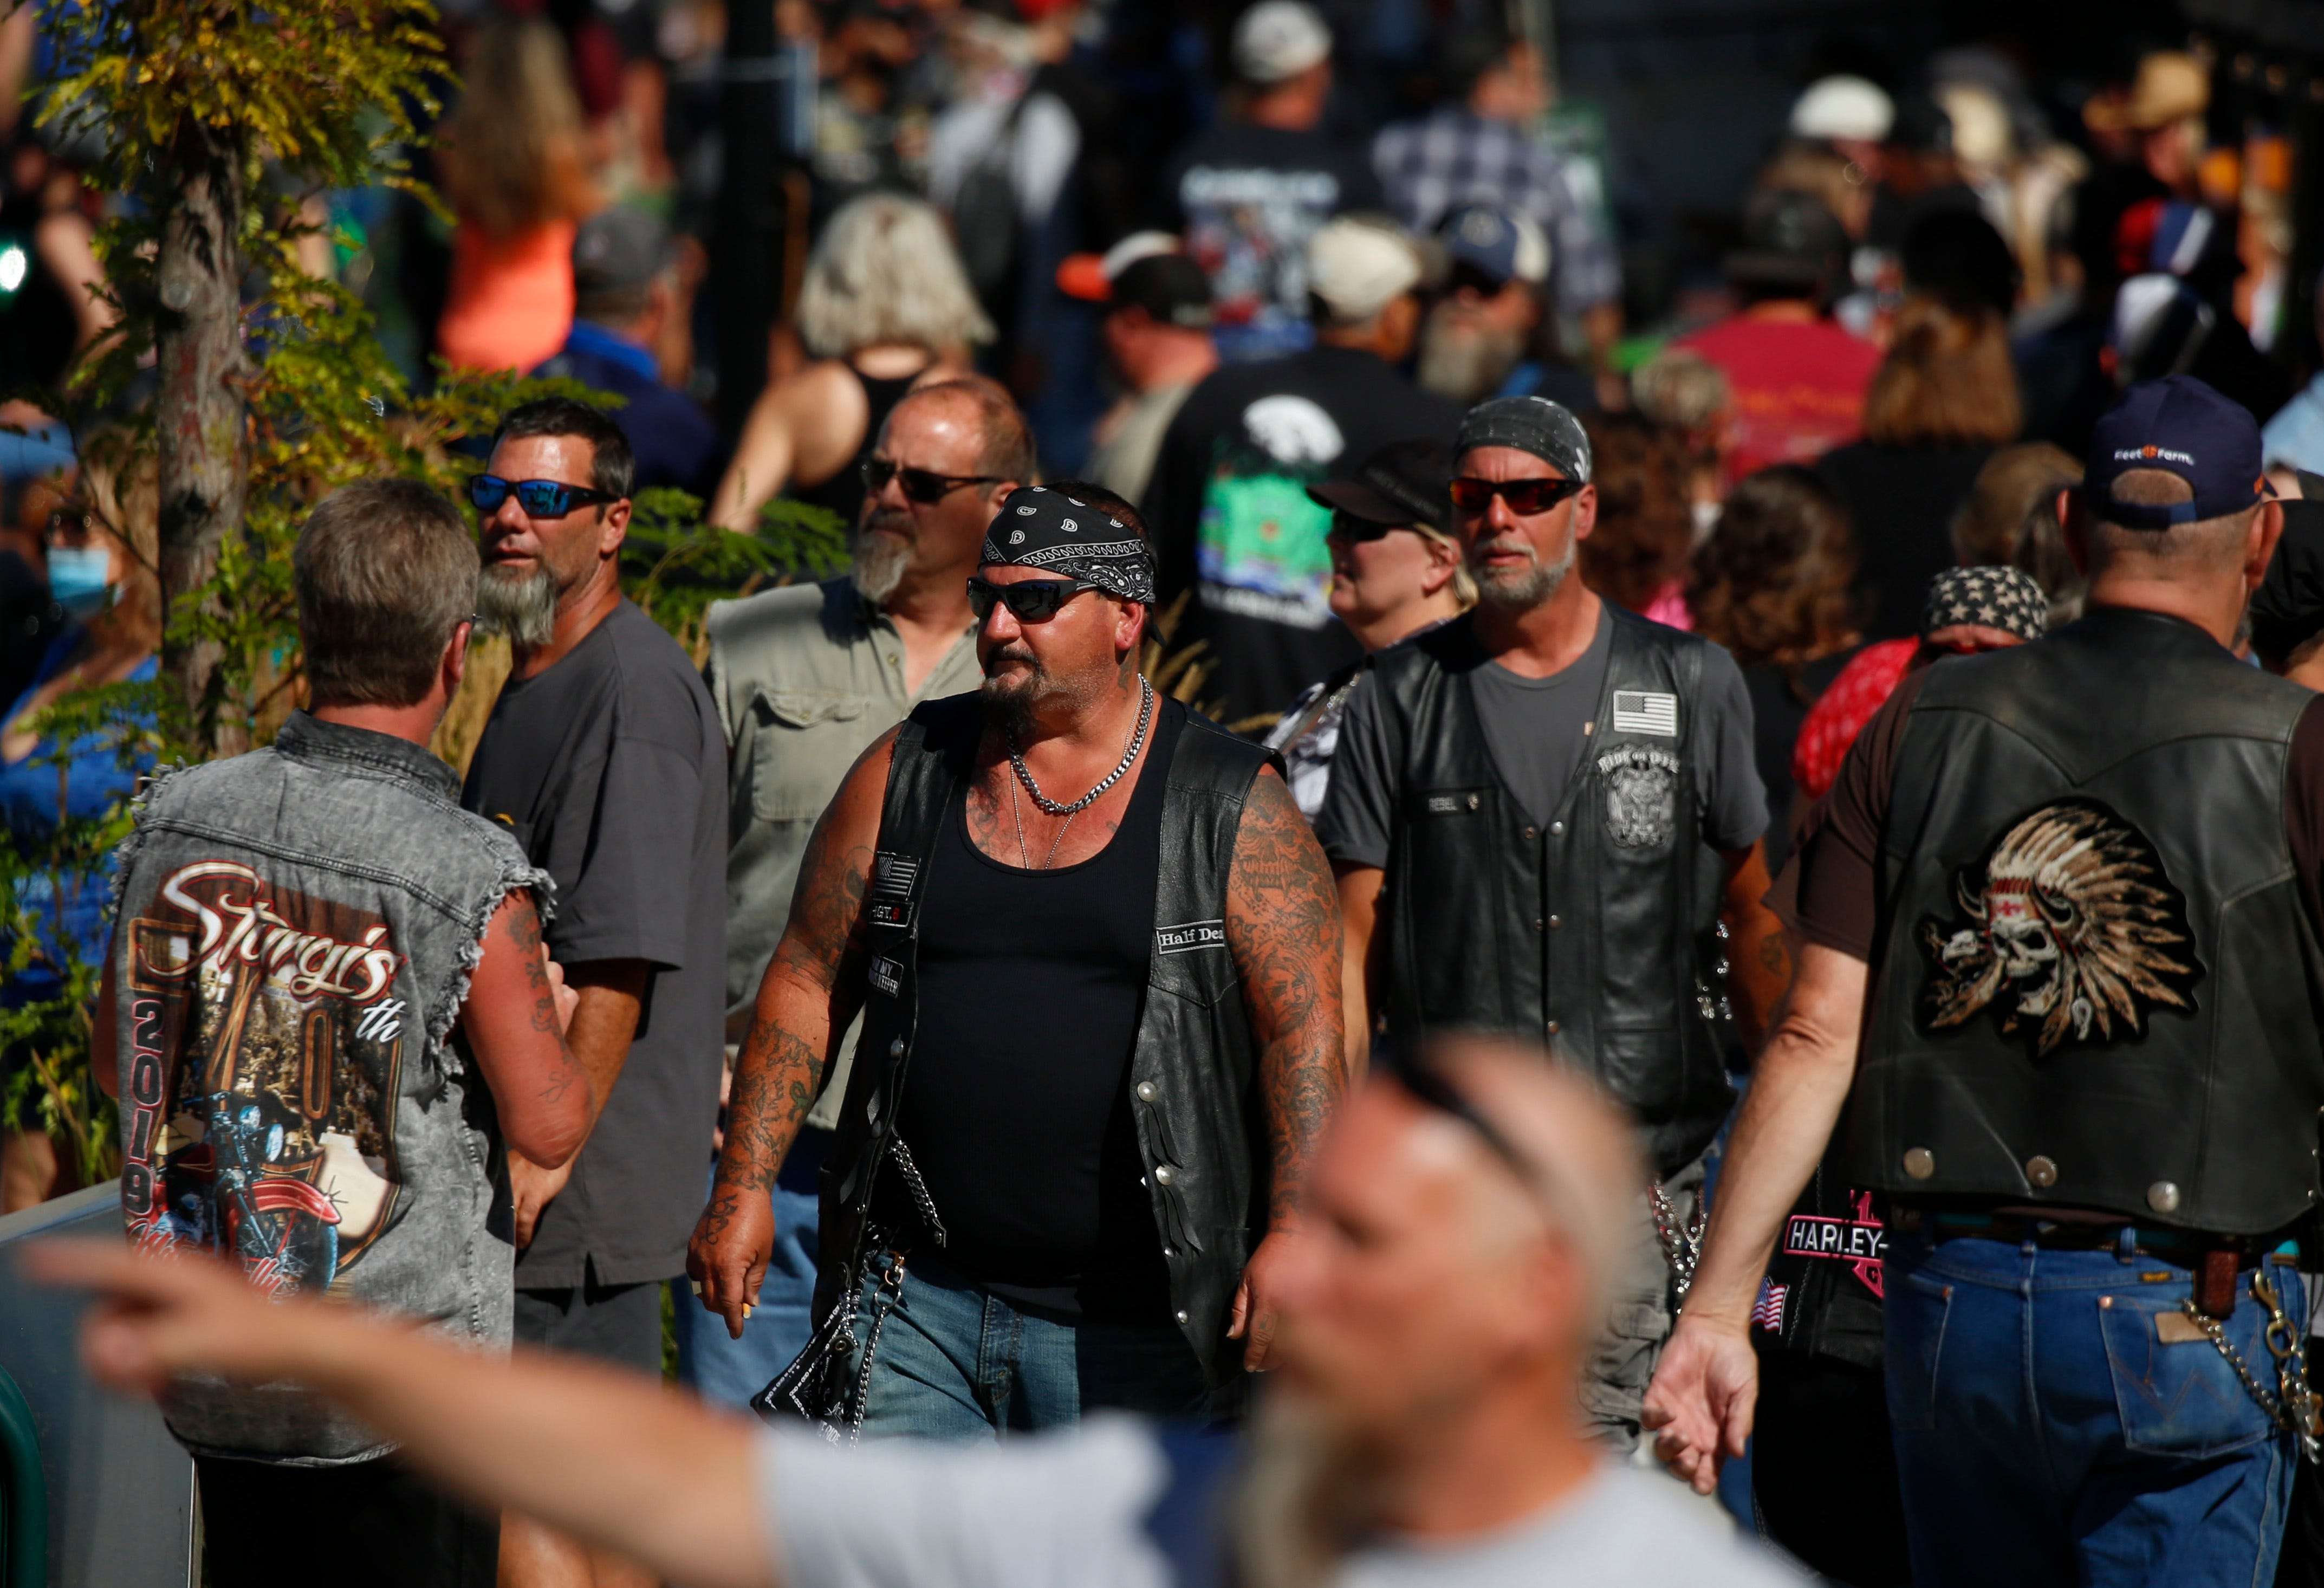 The Sturgis Motorcycle Rally might have led to more than 260,000 new